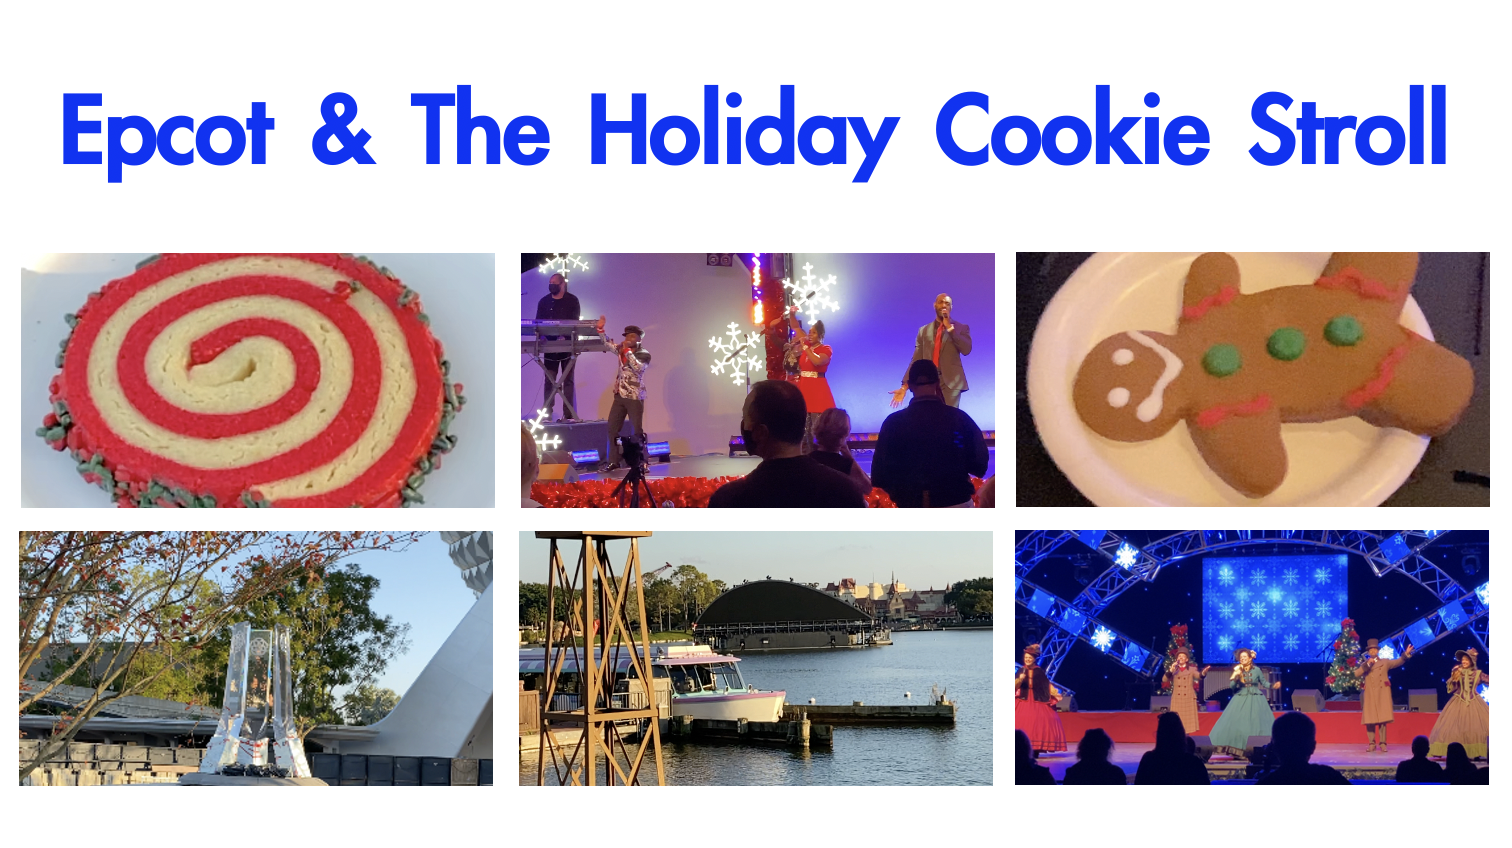 Epcot & The Cookie Stroll